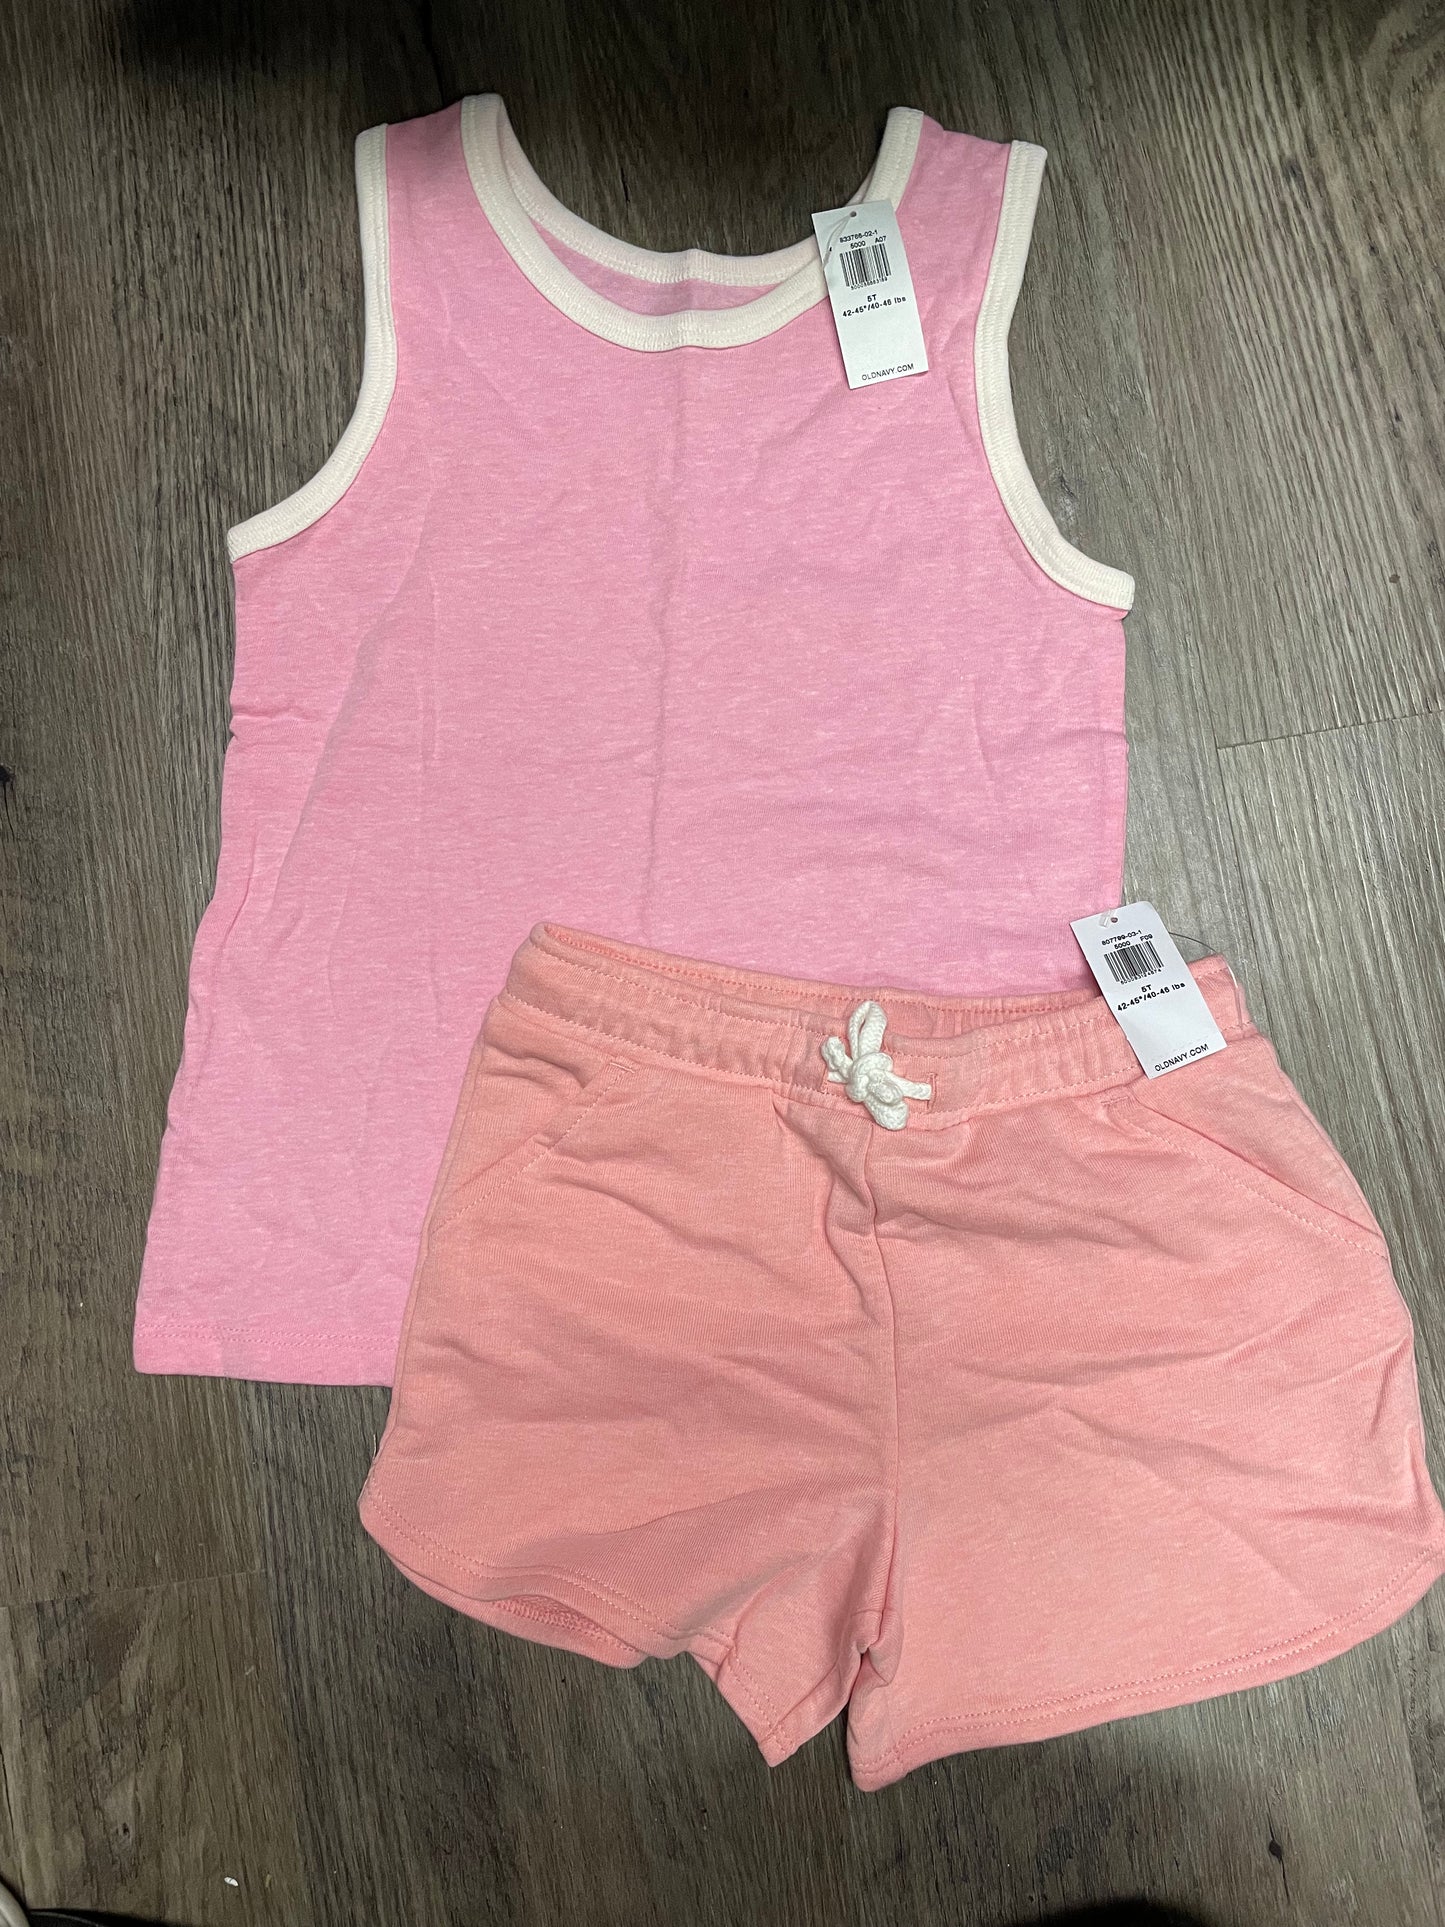 New Girl 3T old navy short and shirt. Summer